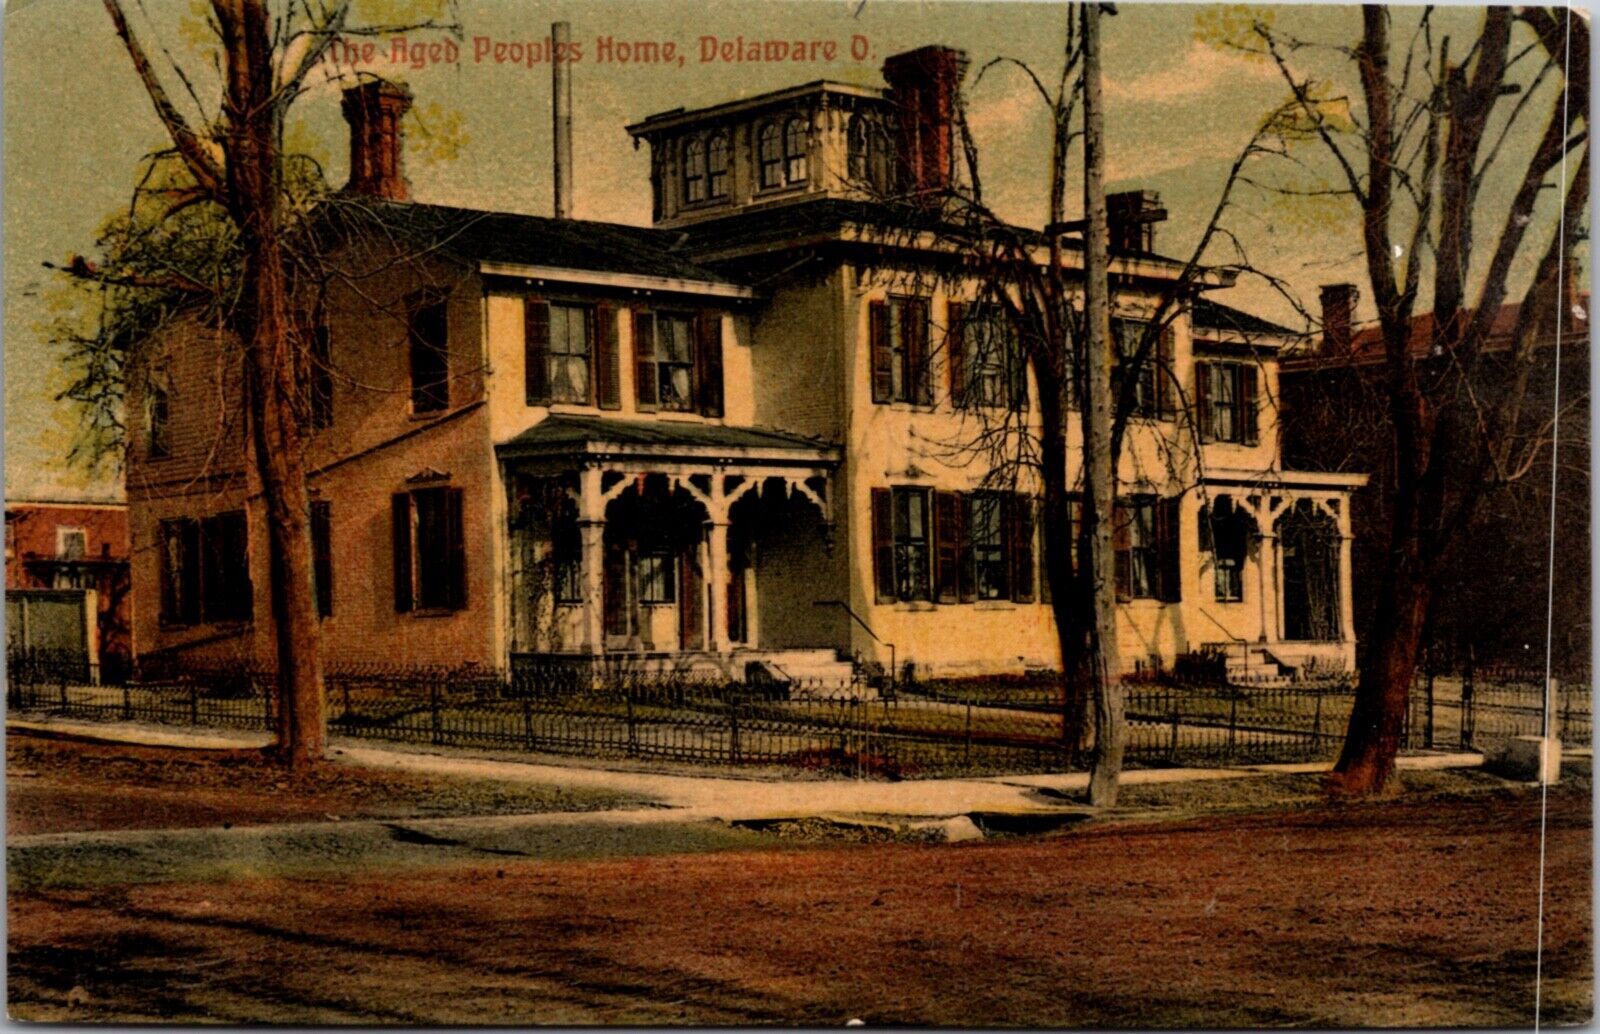 Postcard The Aged Peoples Home in Delaware, Ohio